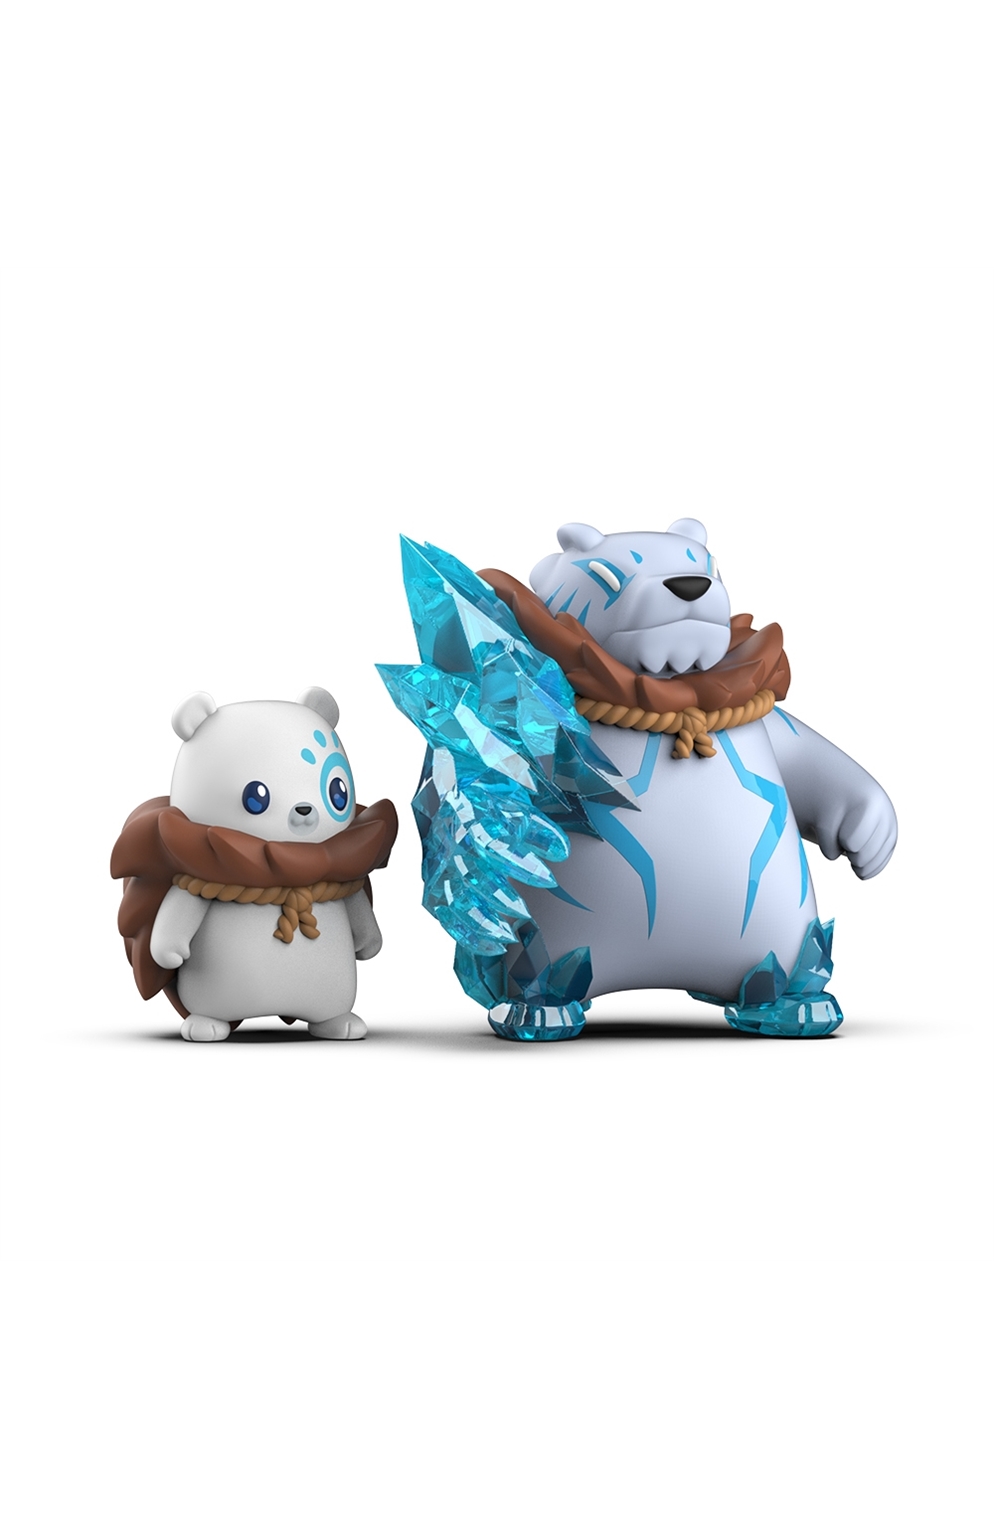 Casting Shadows Vinyl Figures Set: Frost Polarpaw & Frost The Merciless